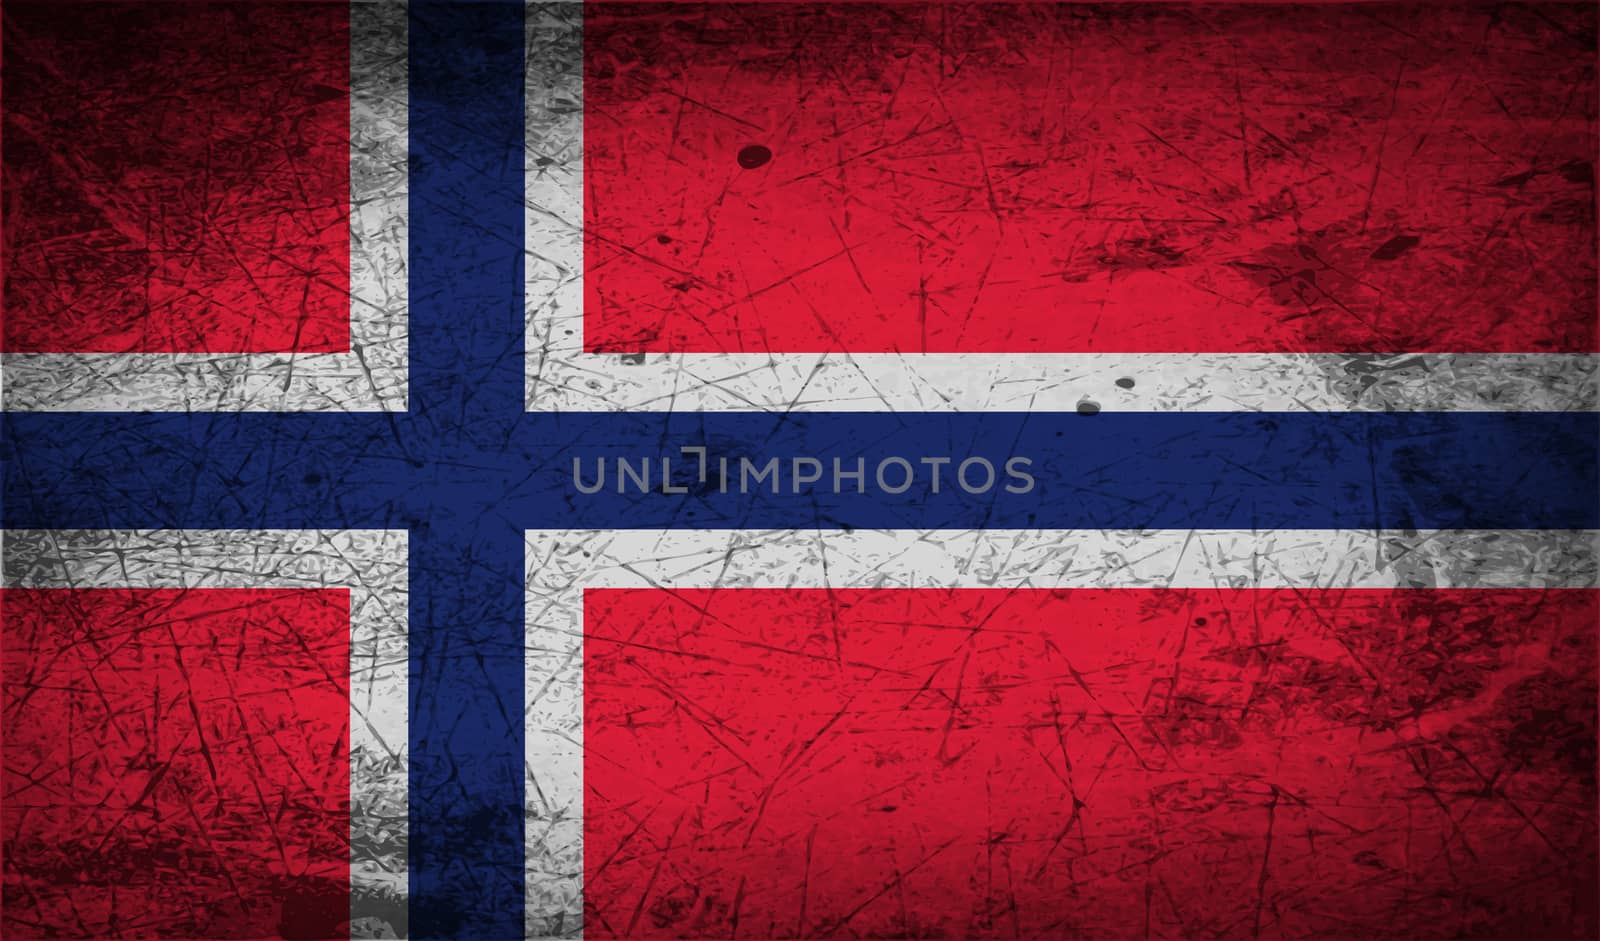 Flag of Norway with old texture.  illustration